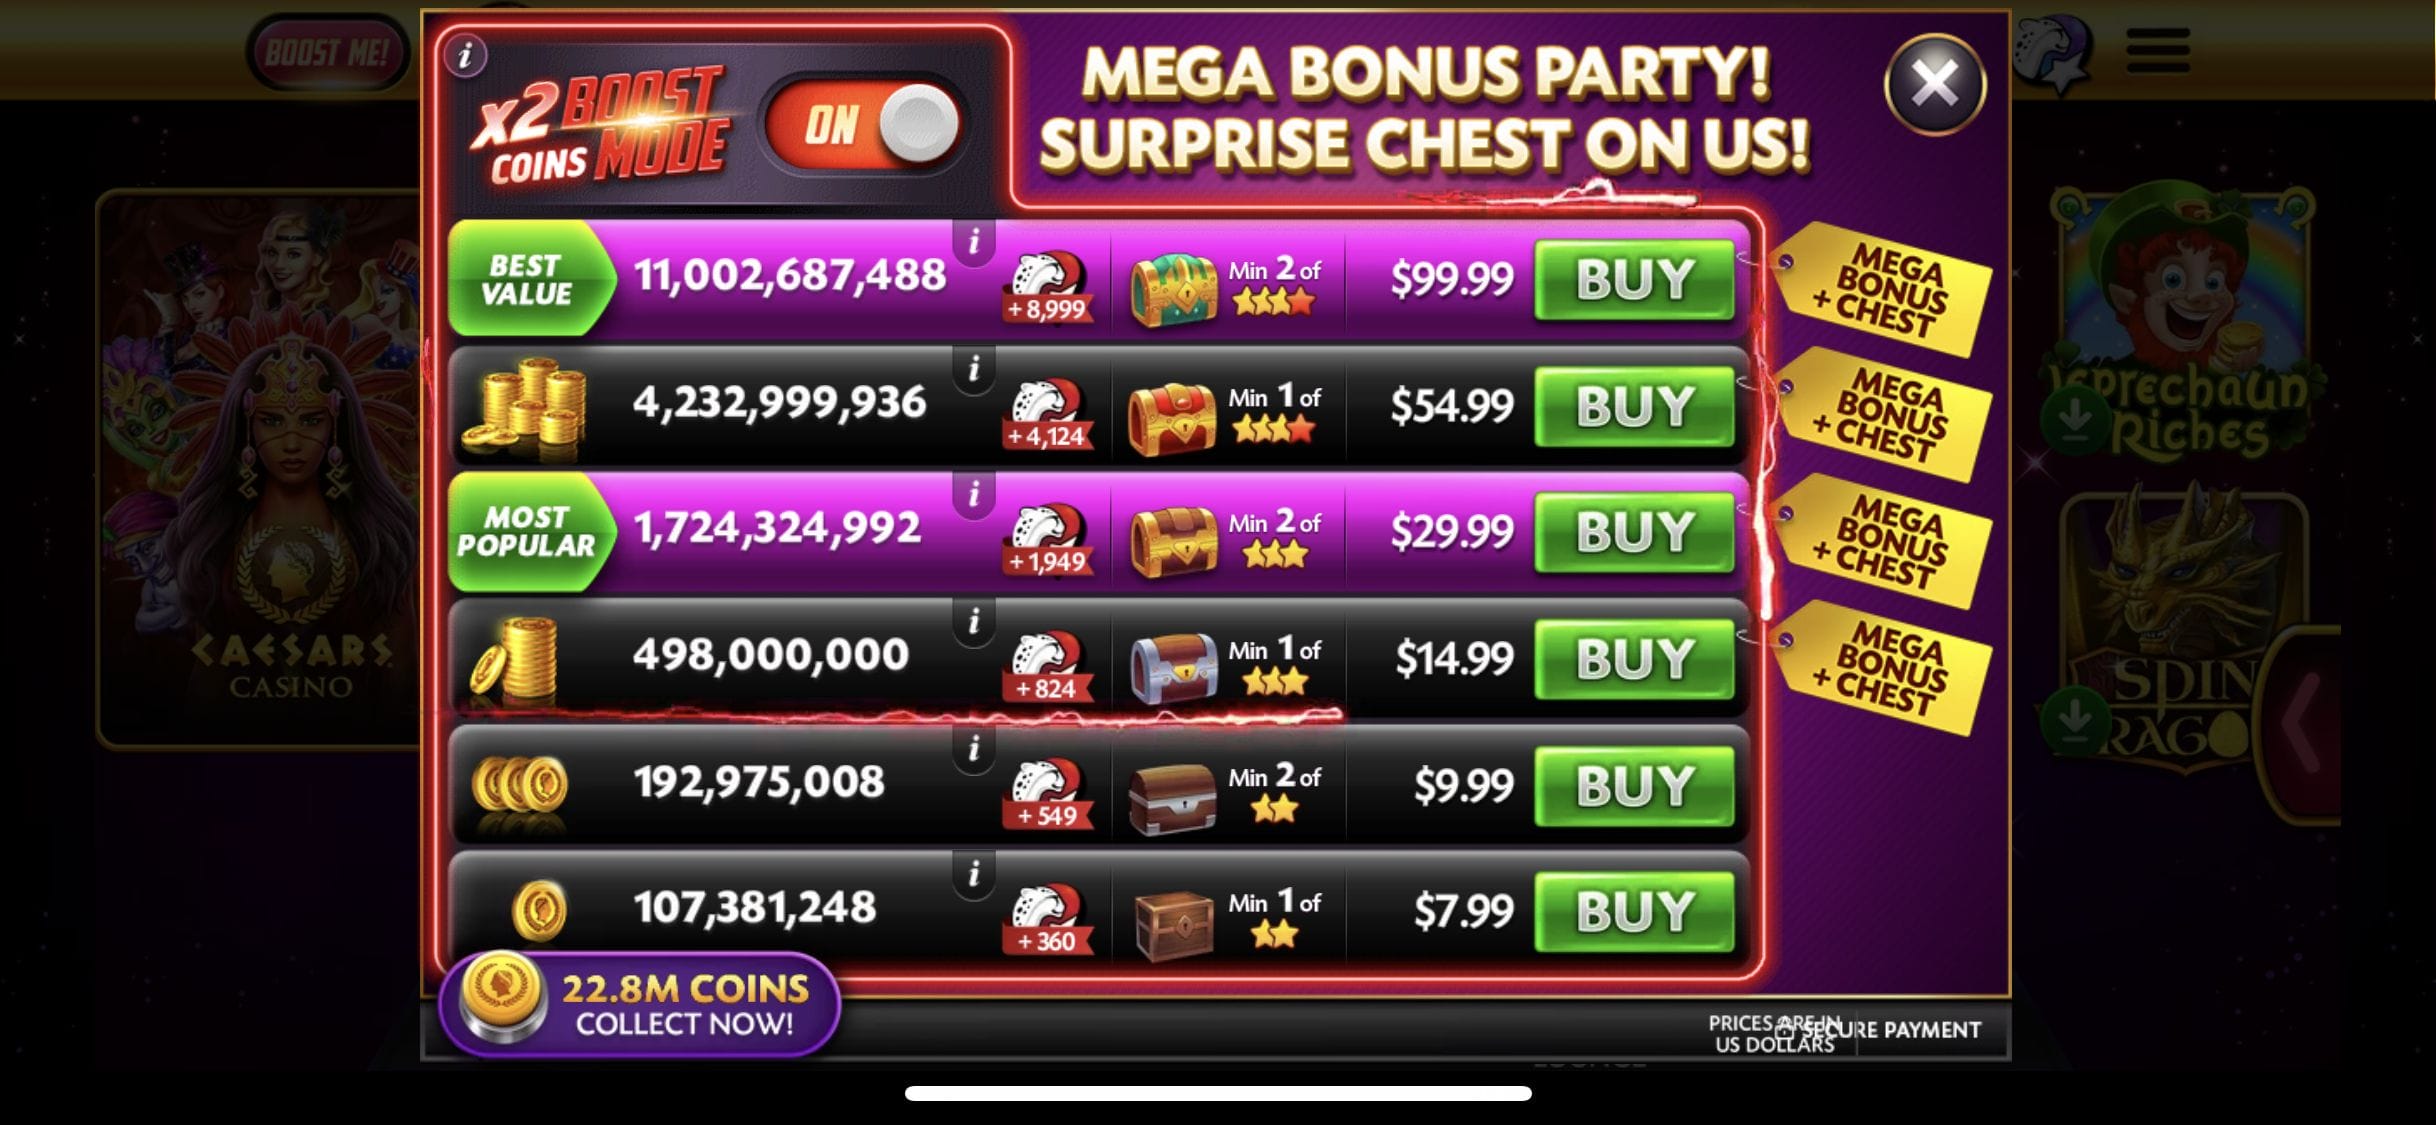 is ceasars slot app real money